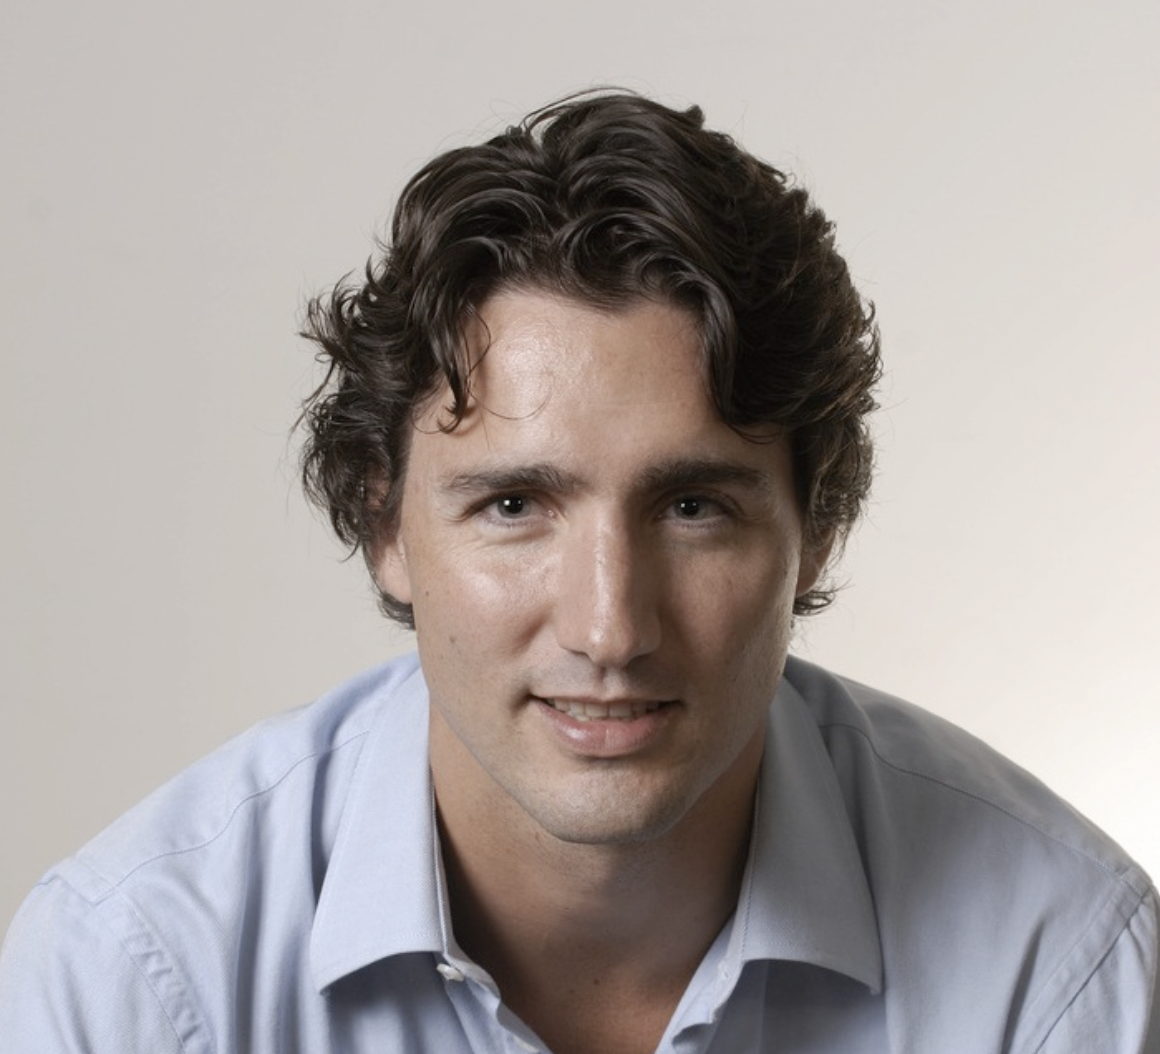 trudeau’s-canada-planning-life-imprisonment-for-anyone-posting-online-‘hate-speech’